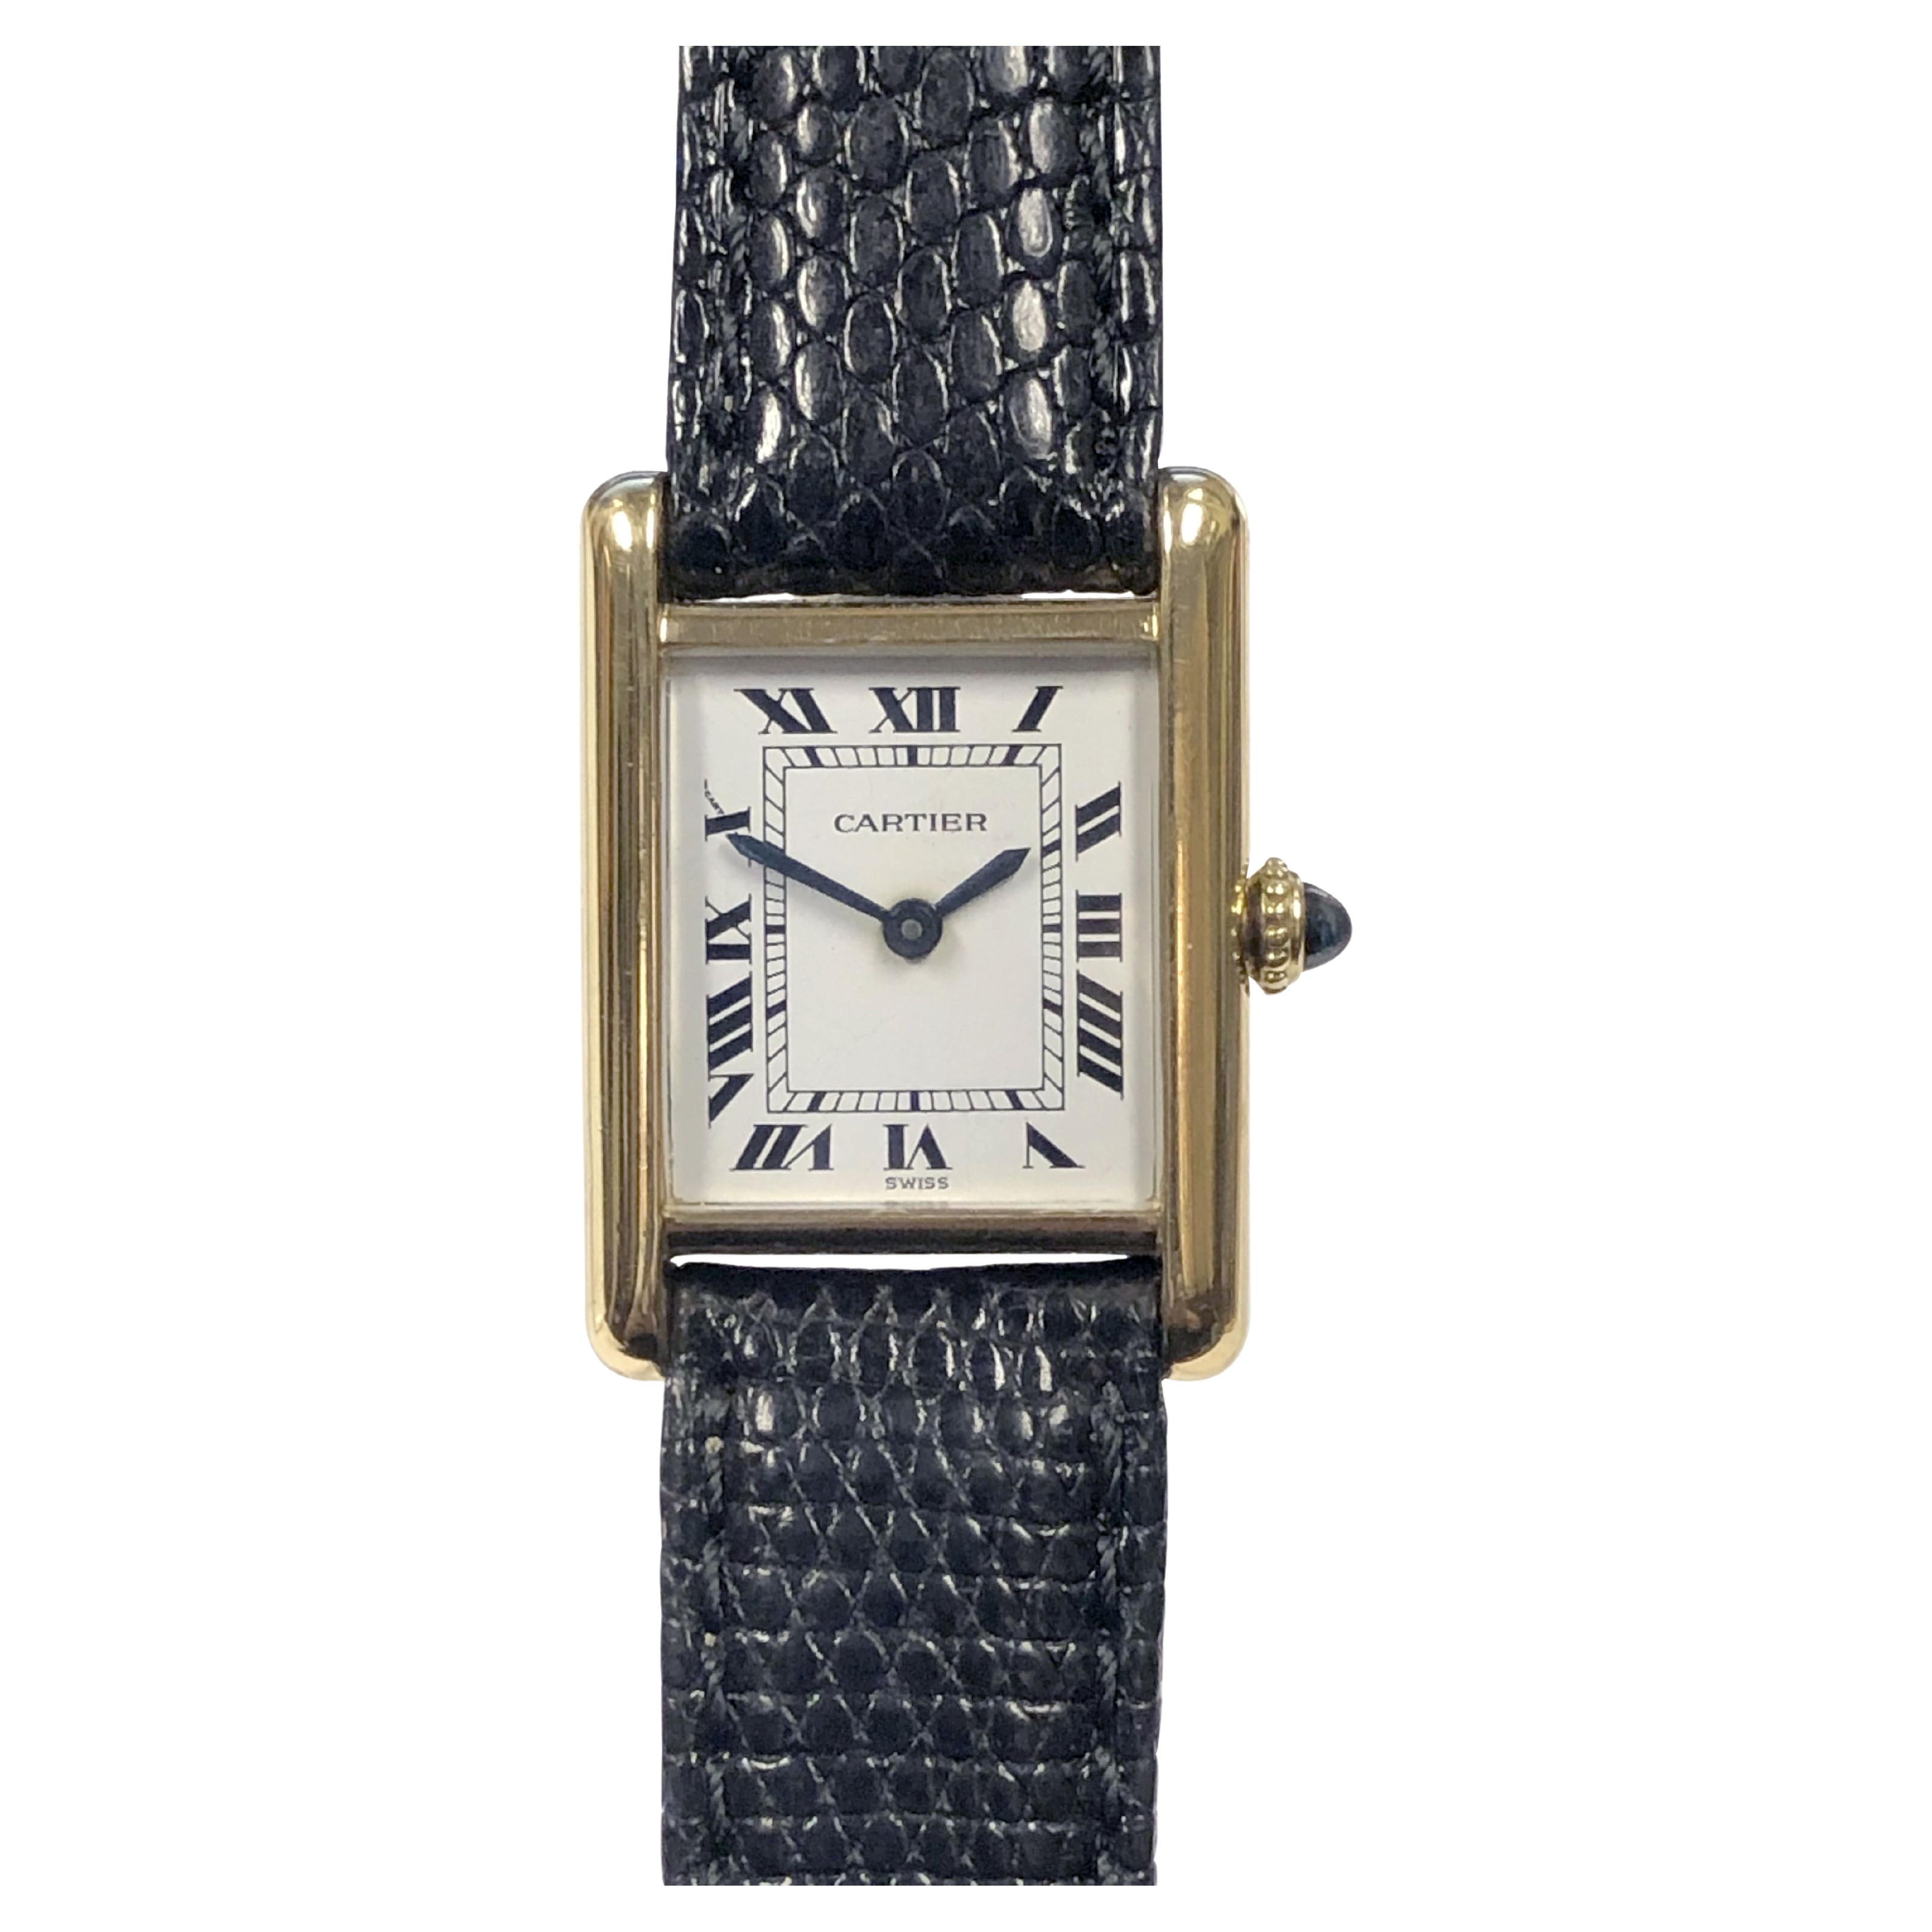 Do Cartier watches hold value?